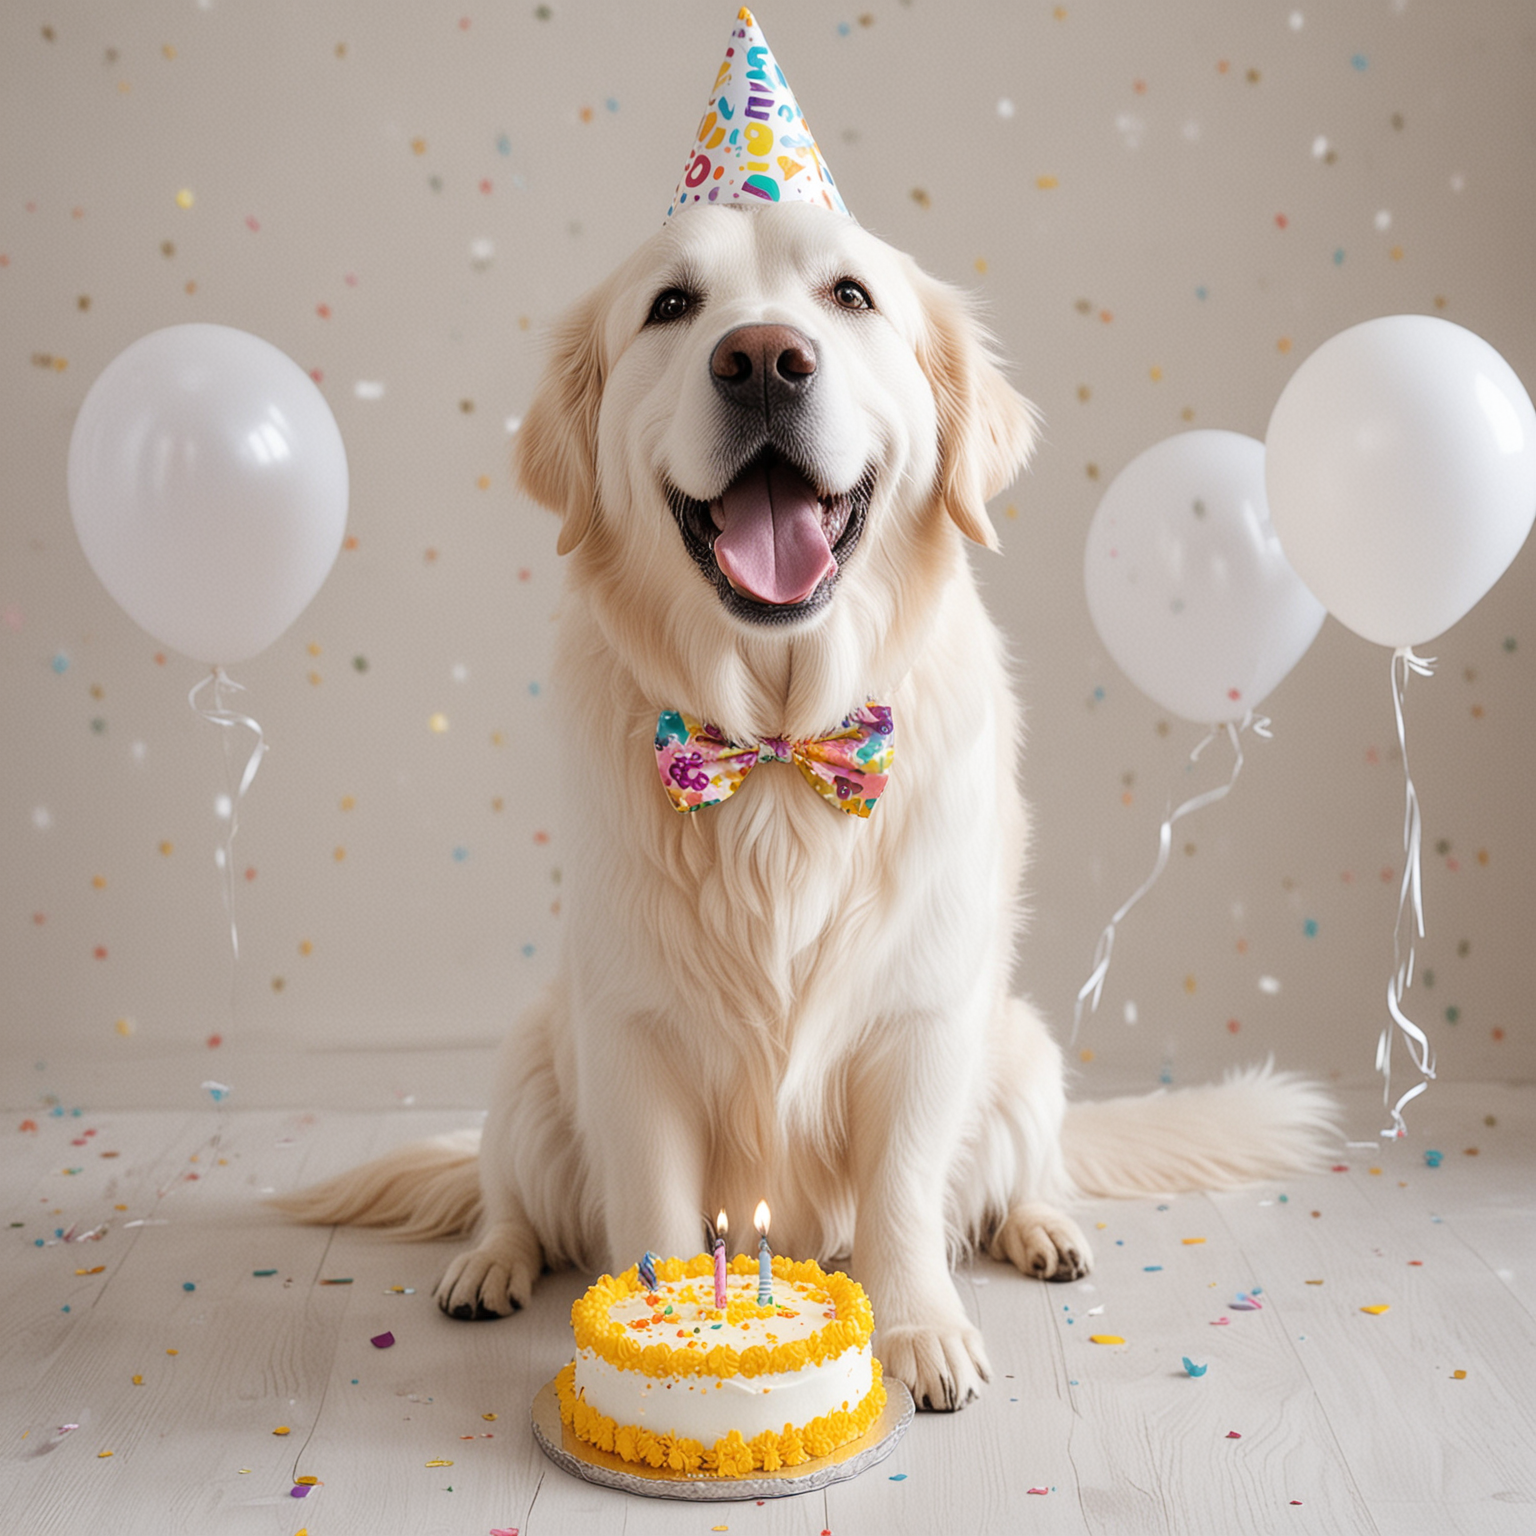 ImageImageHere are the images of a white Golden Retriever celebrating its 5th birthday with balloons and a cake. on his ears a bow